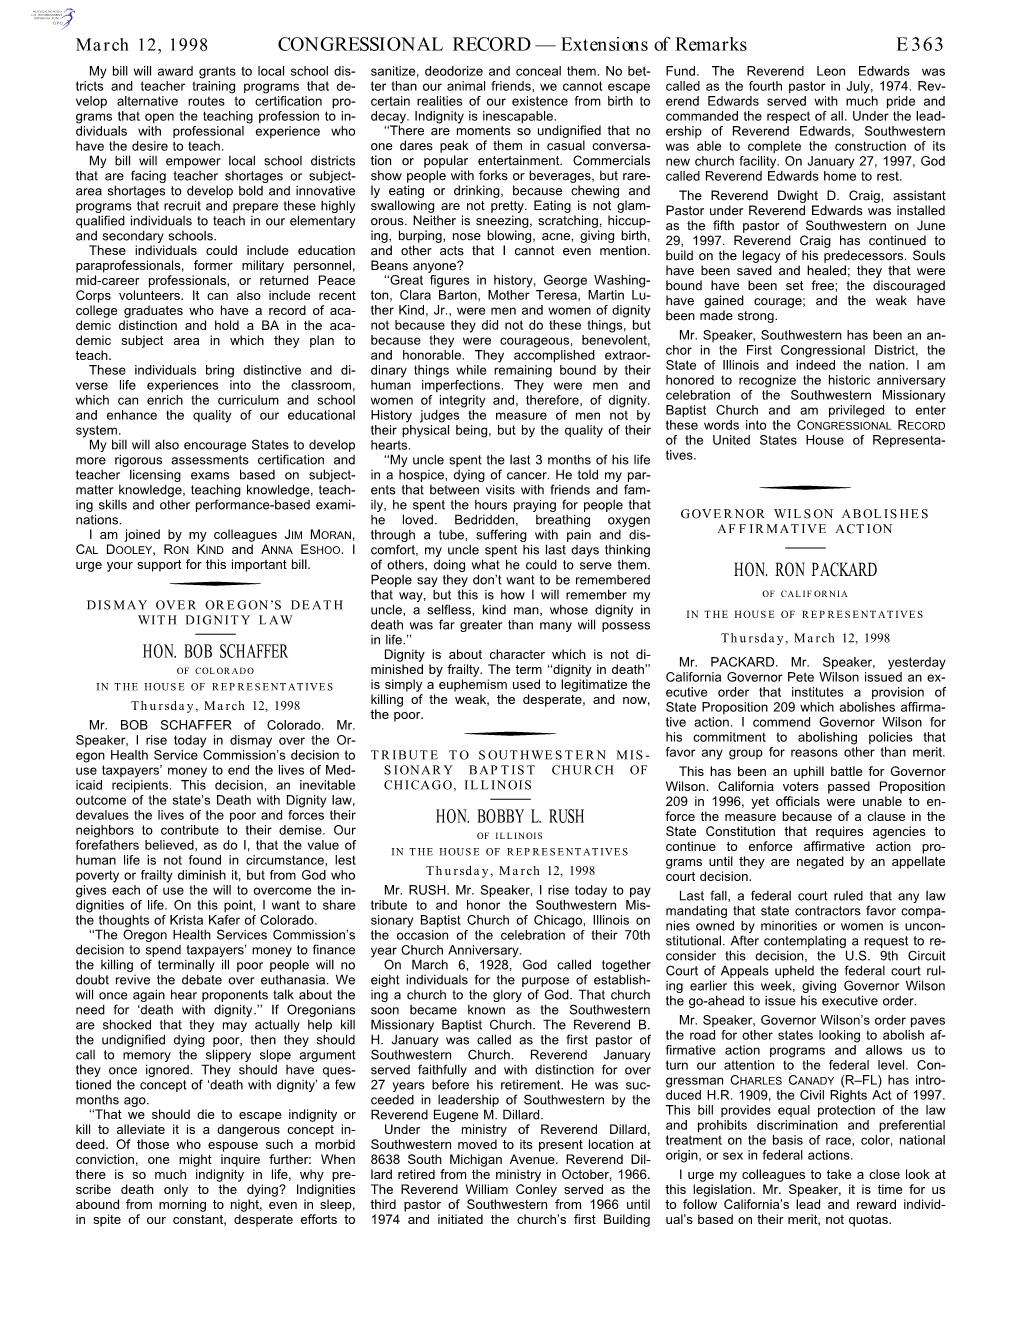 CONGRESSIONAL RECORD— Extensions of Remarks E363 HON